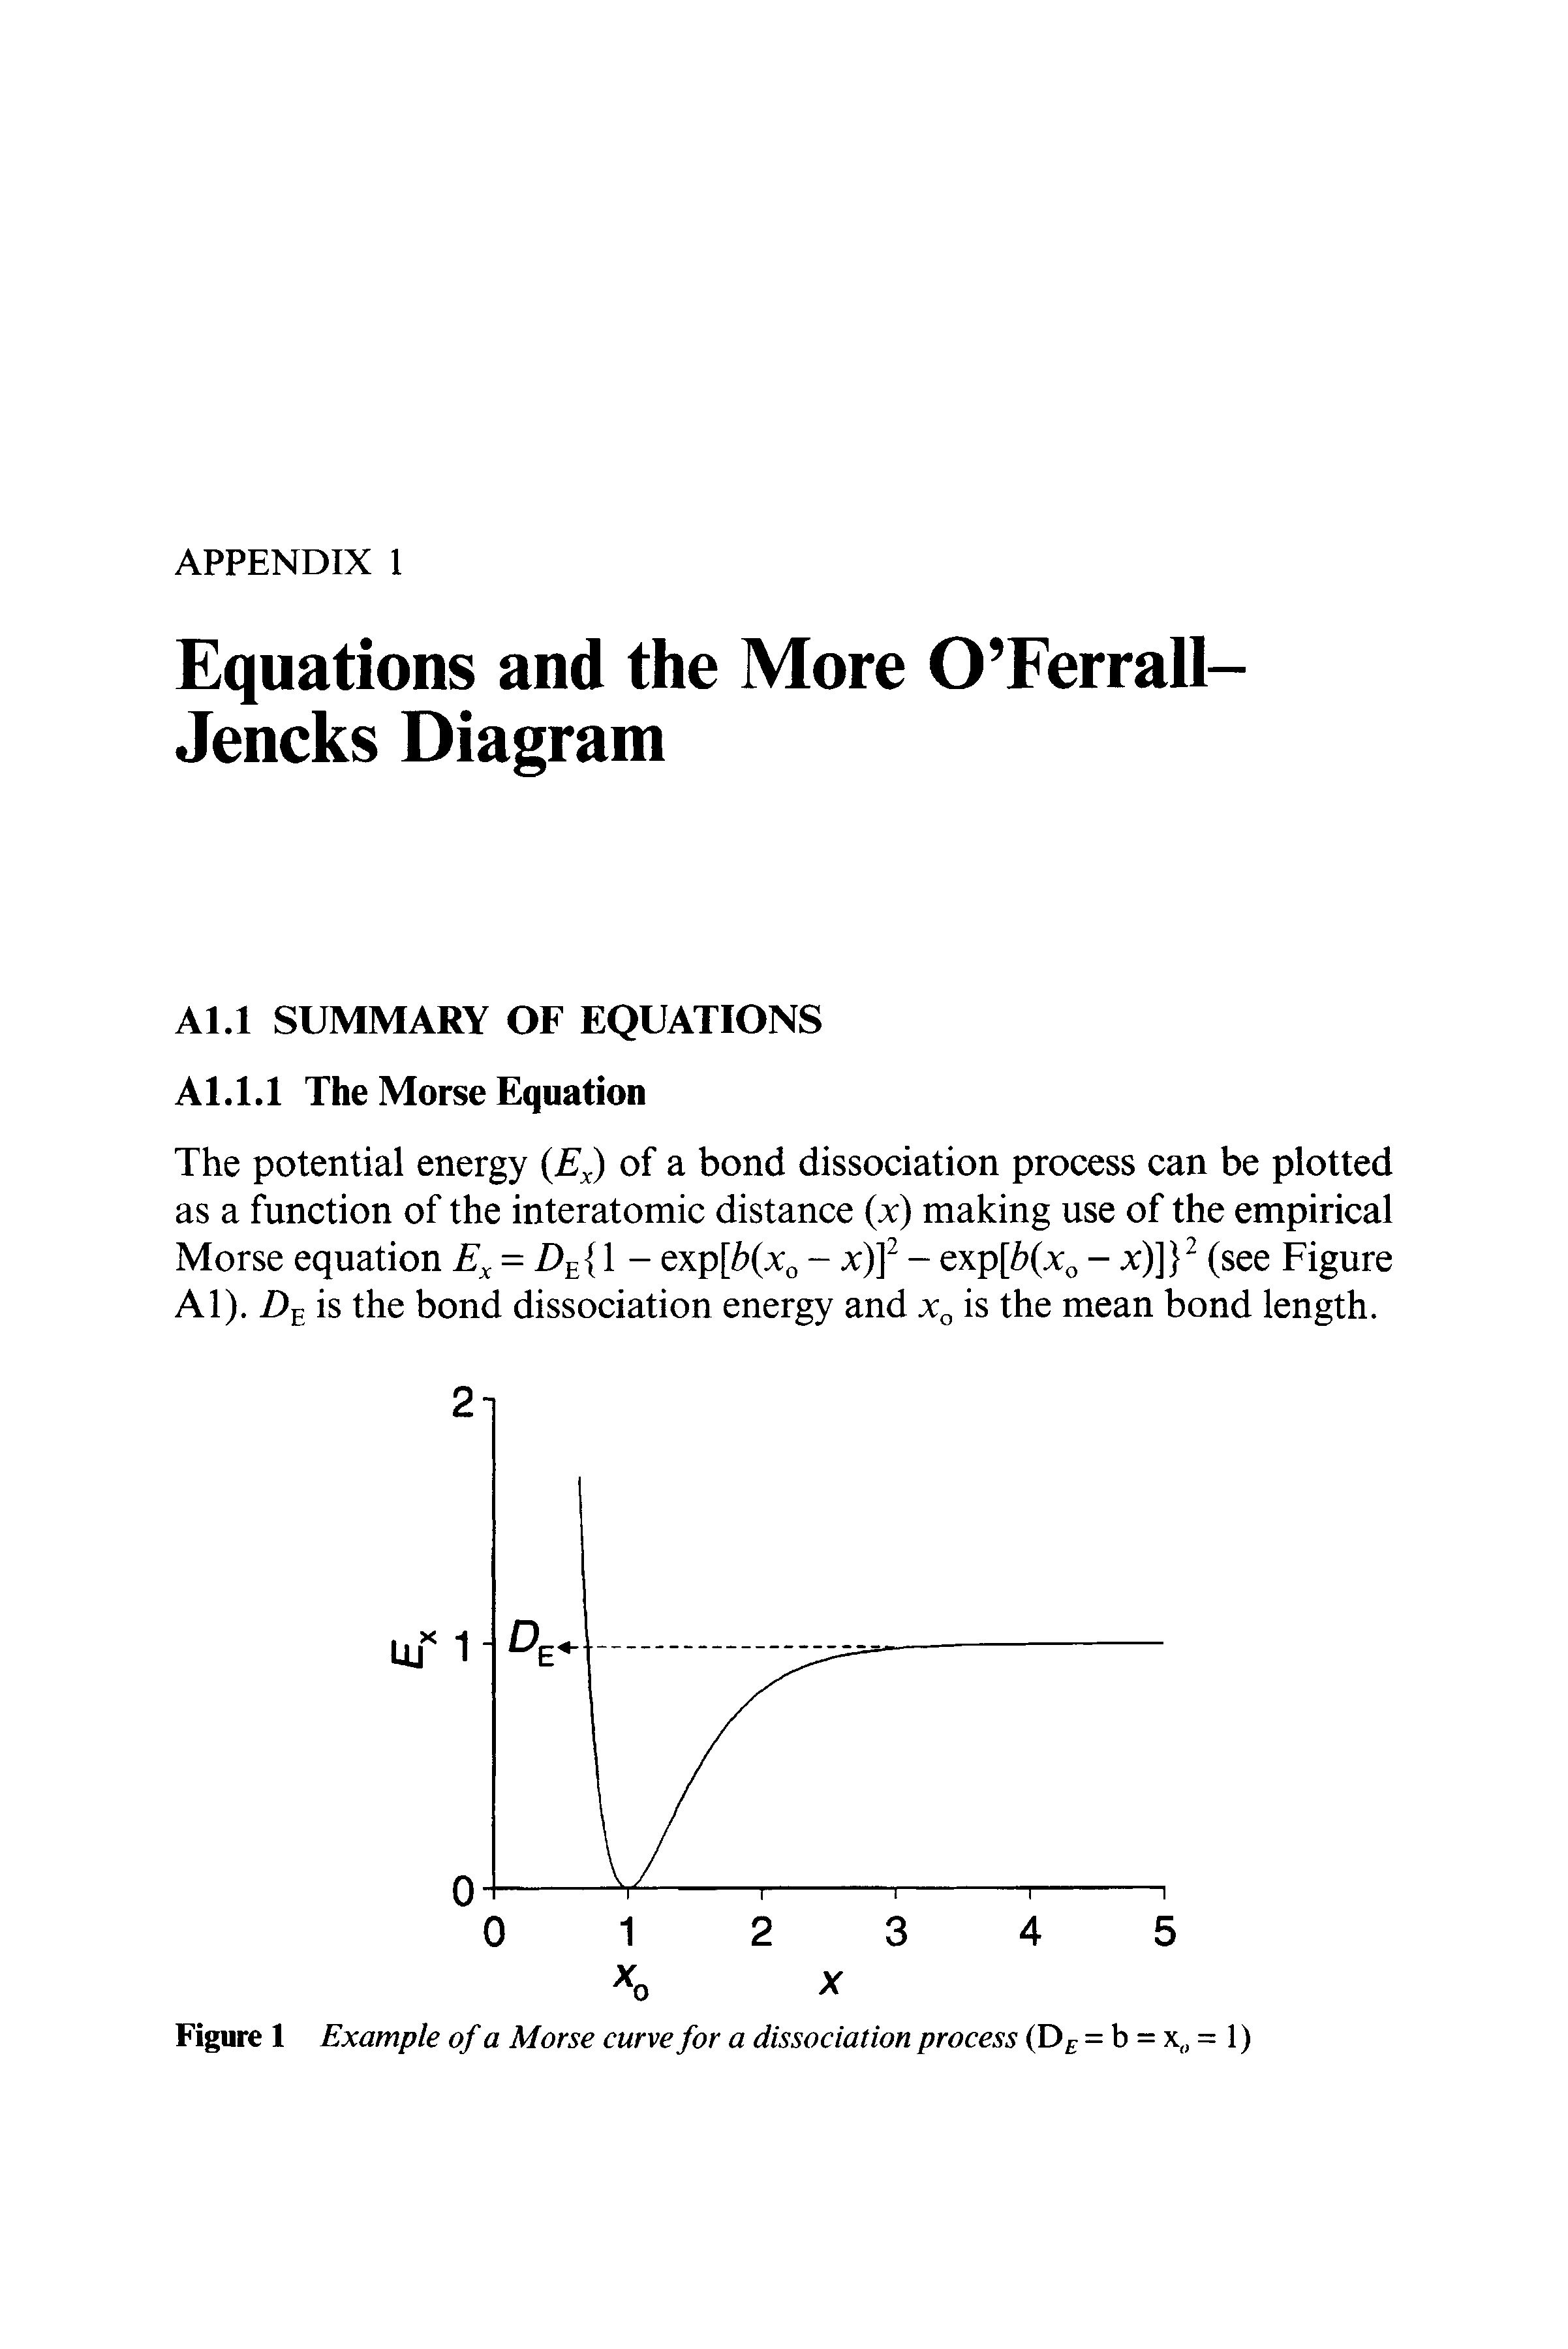 Figure 1 Example of a Morse curve for a dissociation process (D = b =, = 1)...